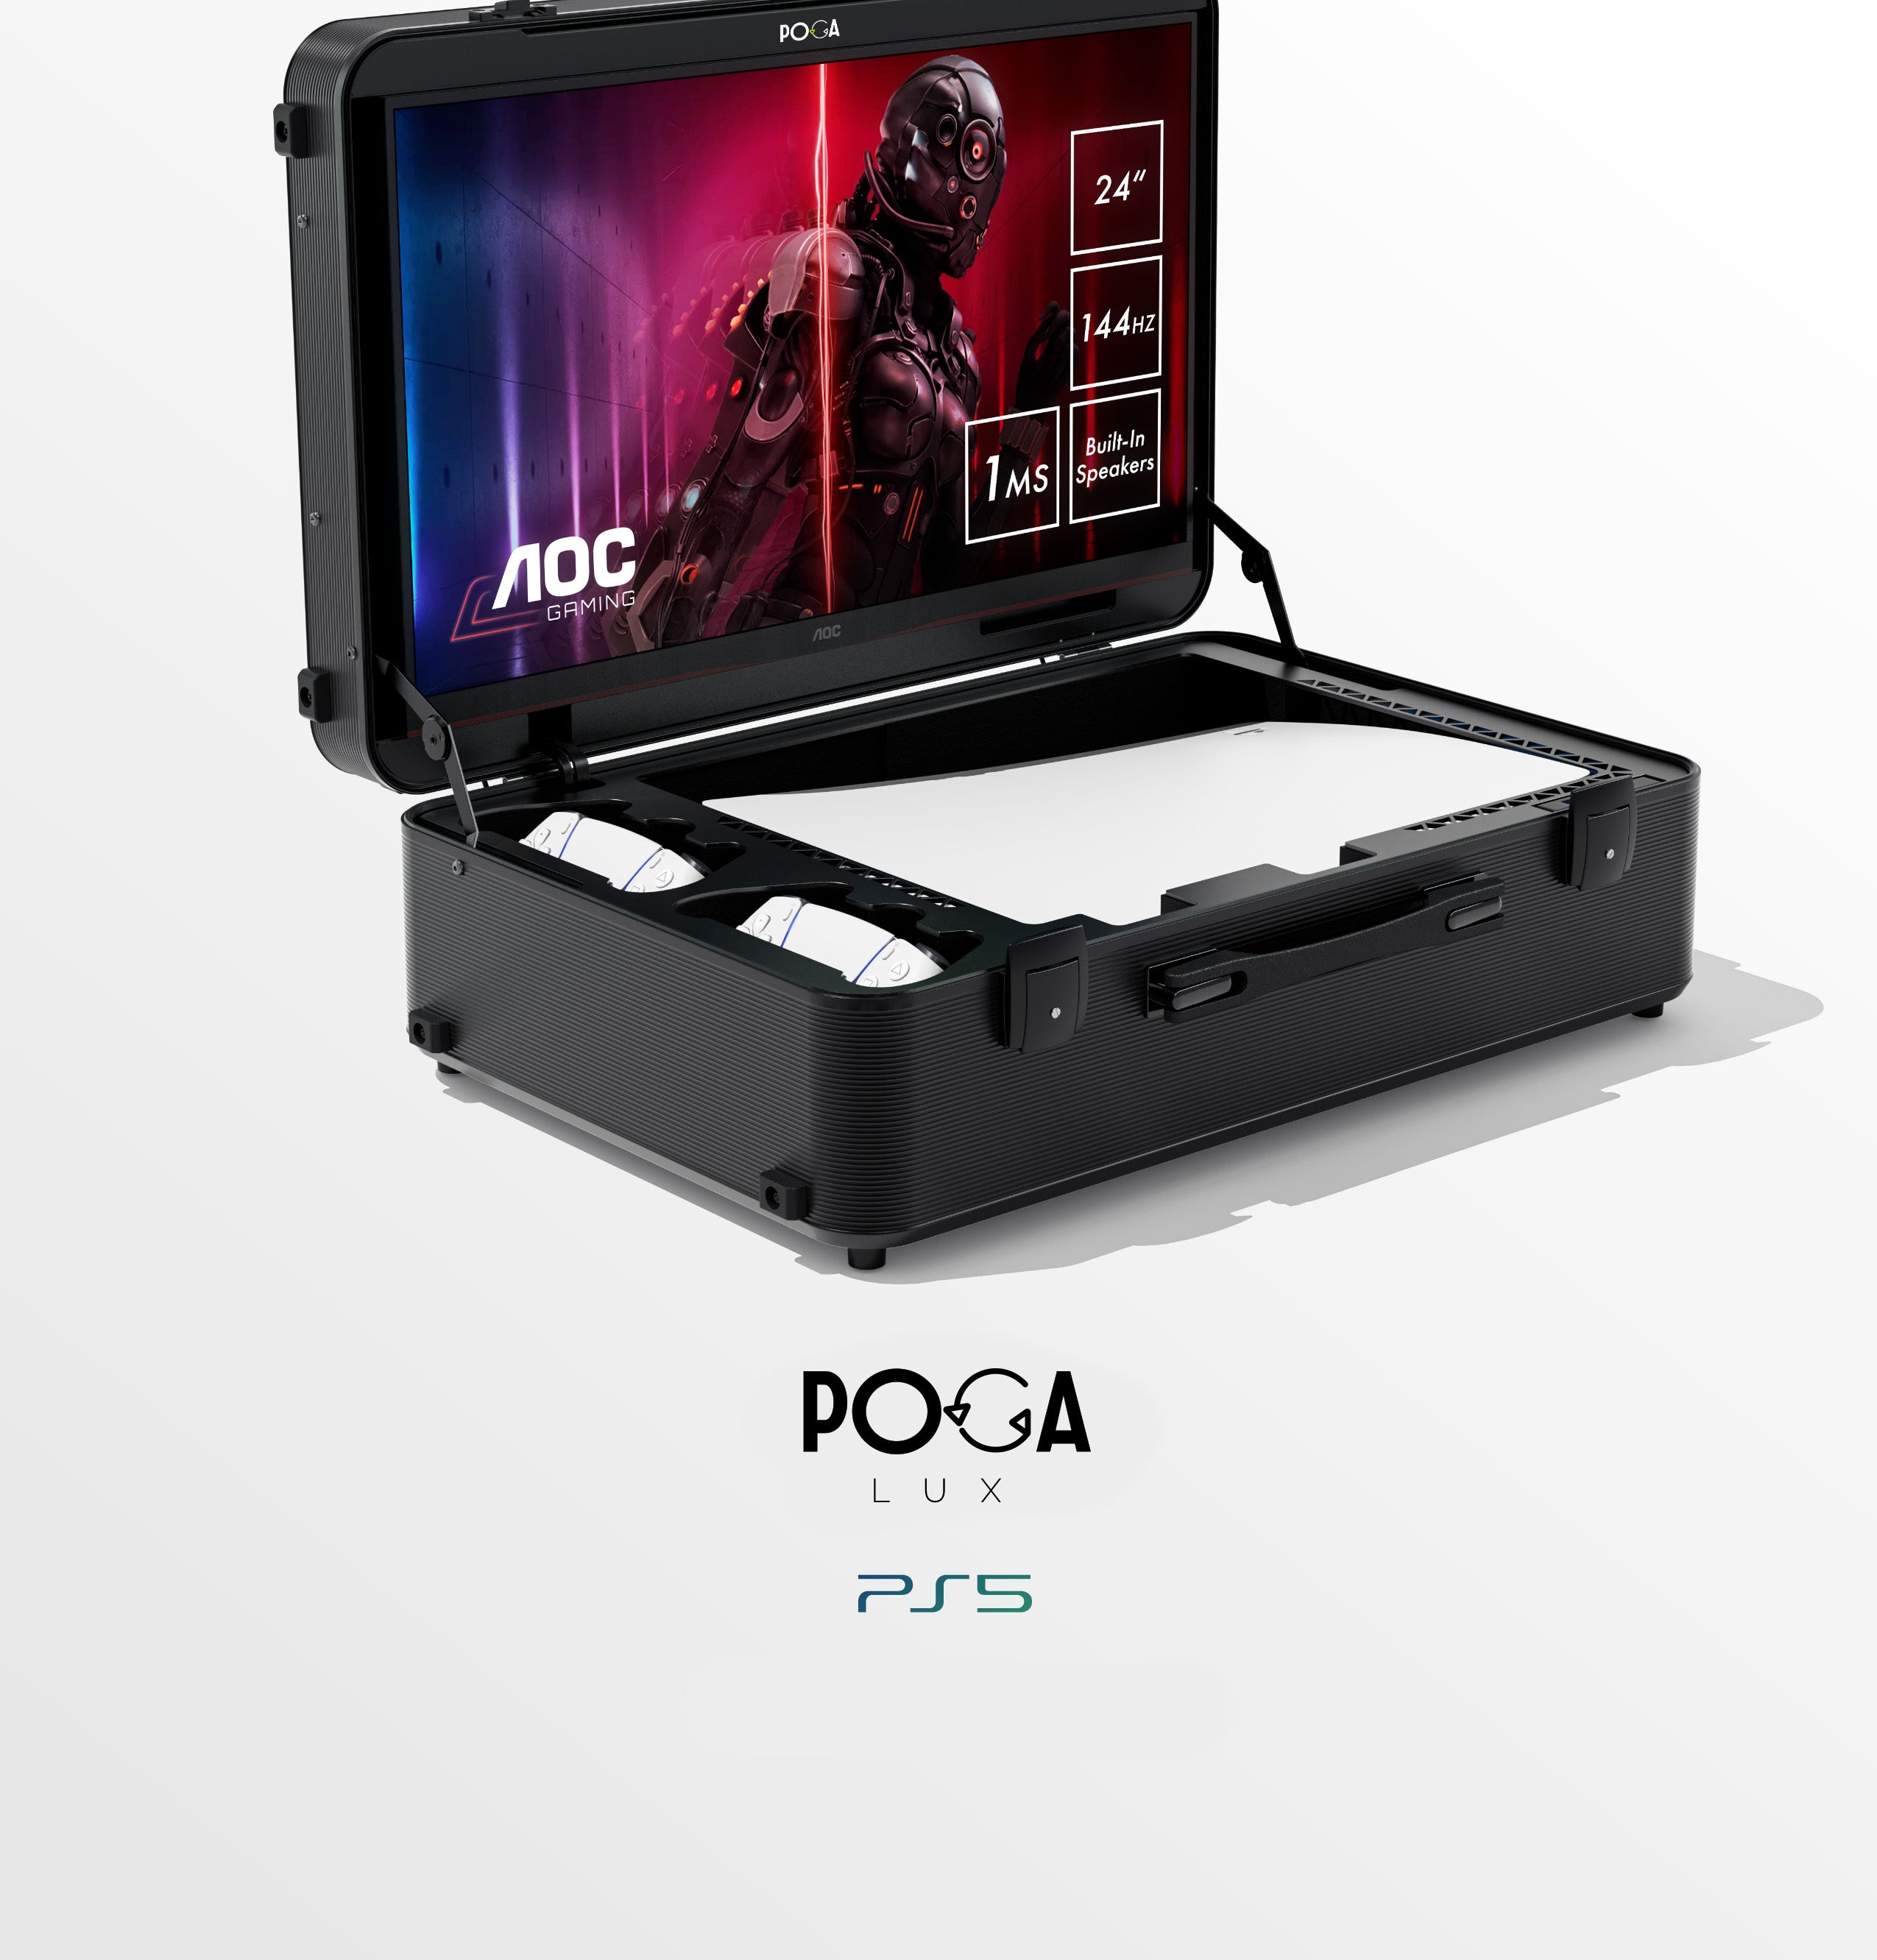 How to get this PS5 Portable Monitor in india.It is available in